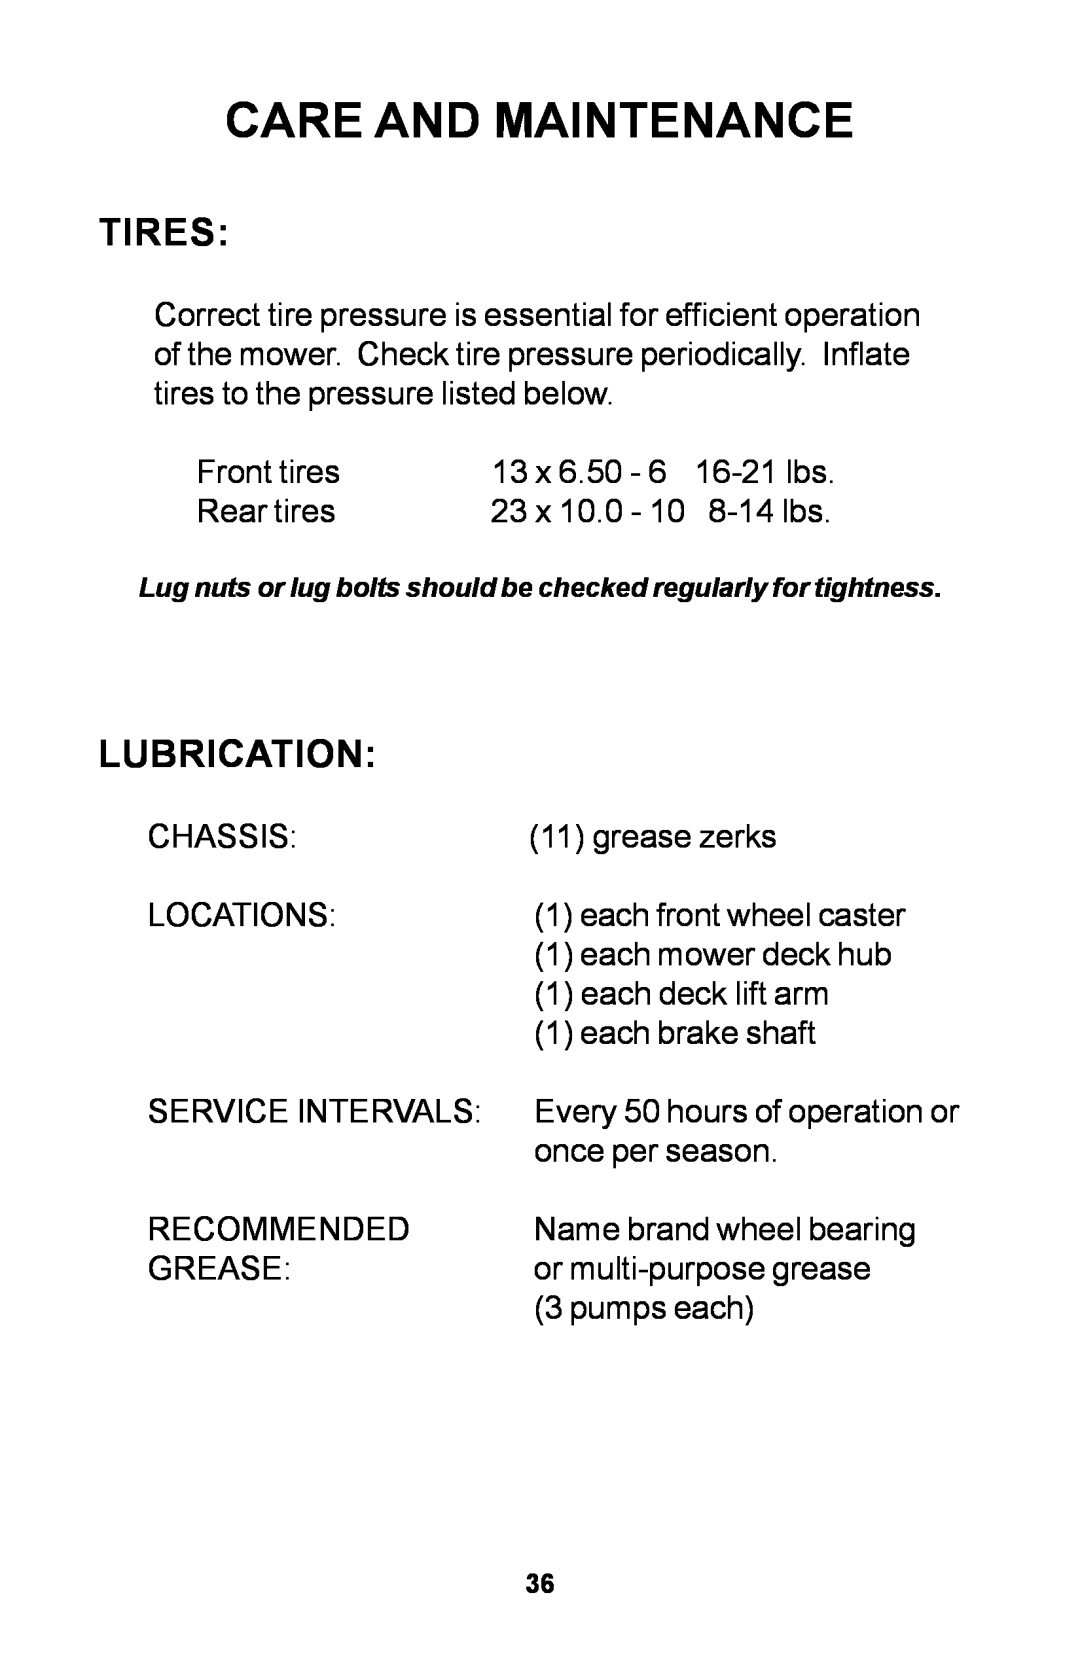 Dixon ZTR manual Tires, Lubrication, Care And Maintenance 